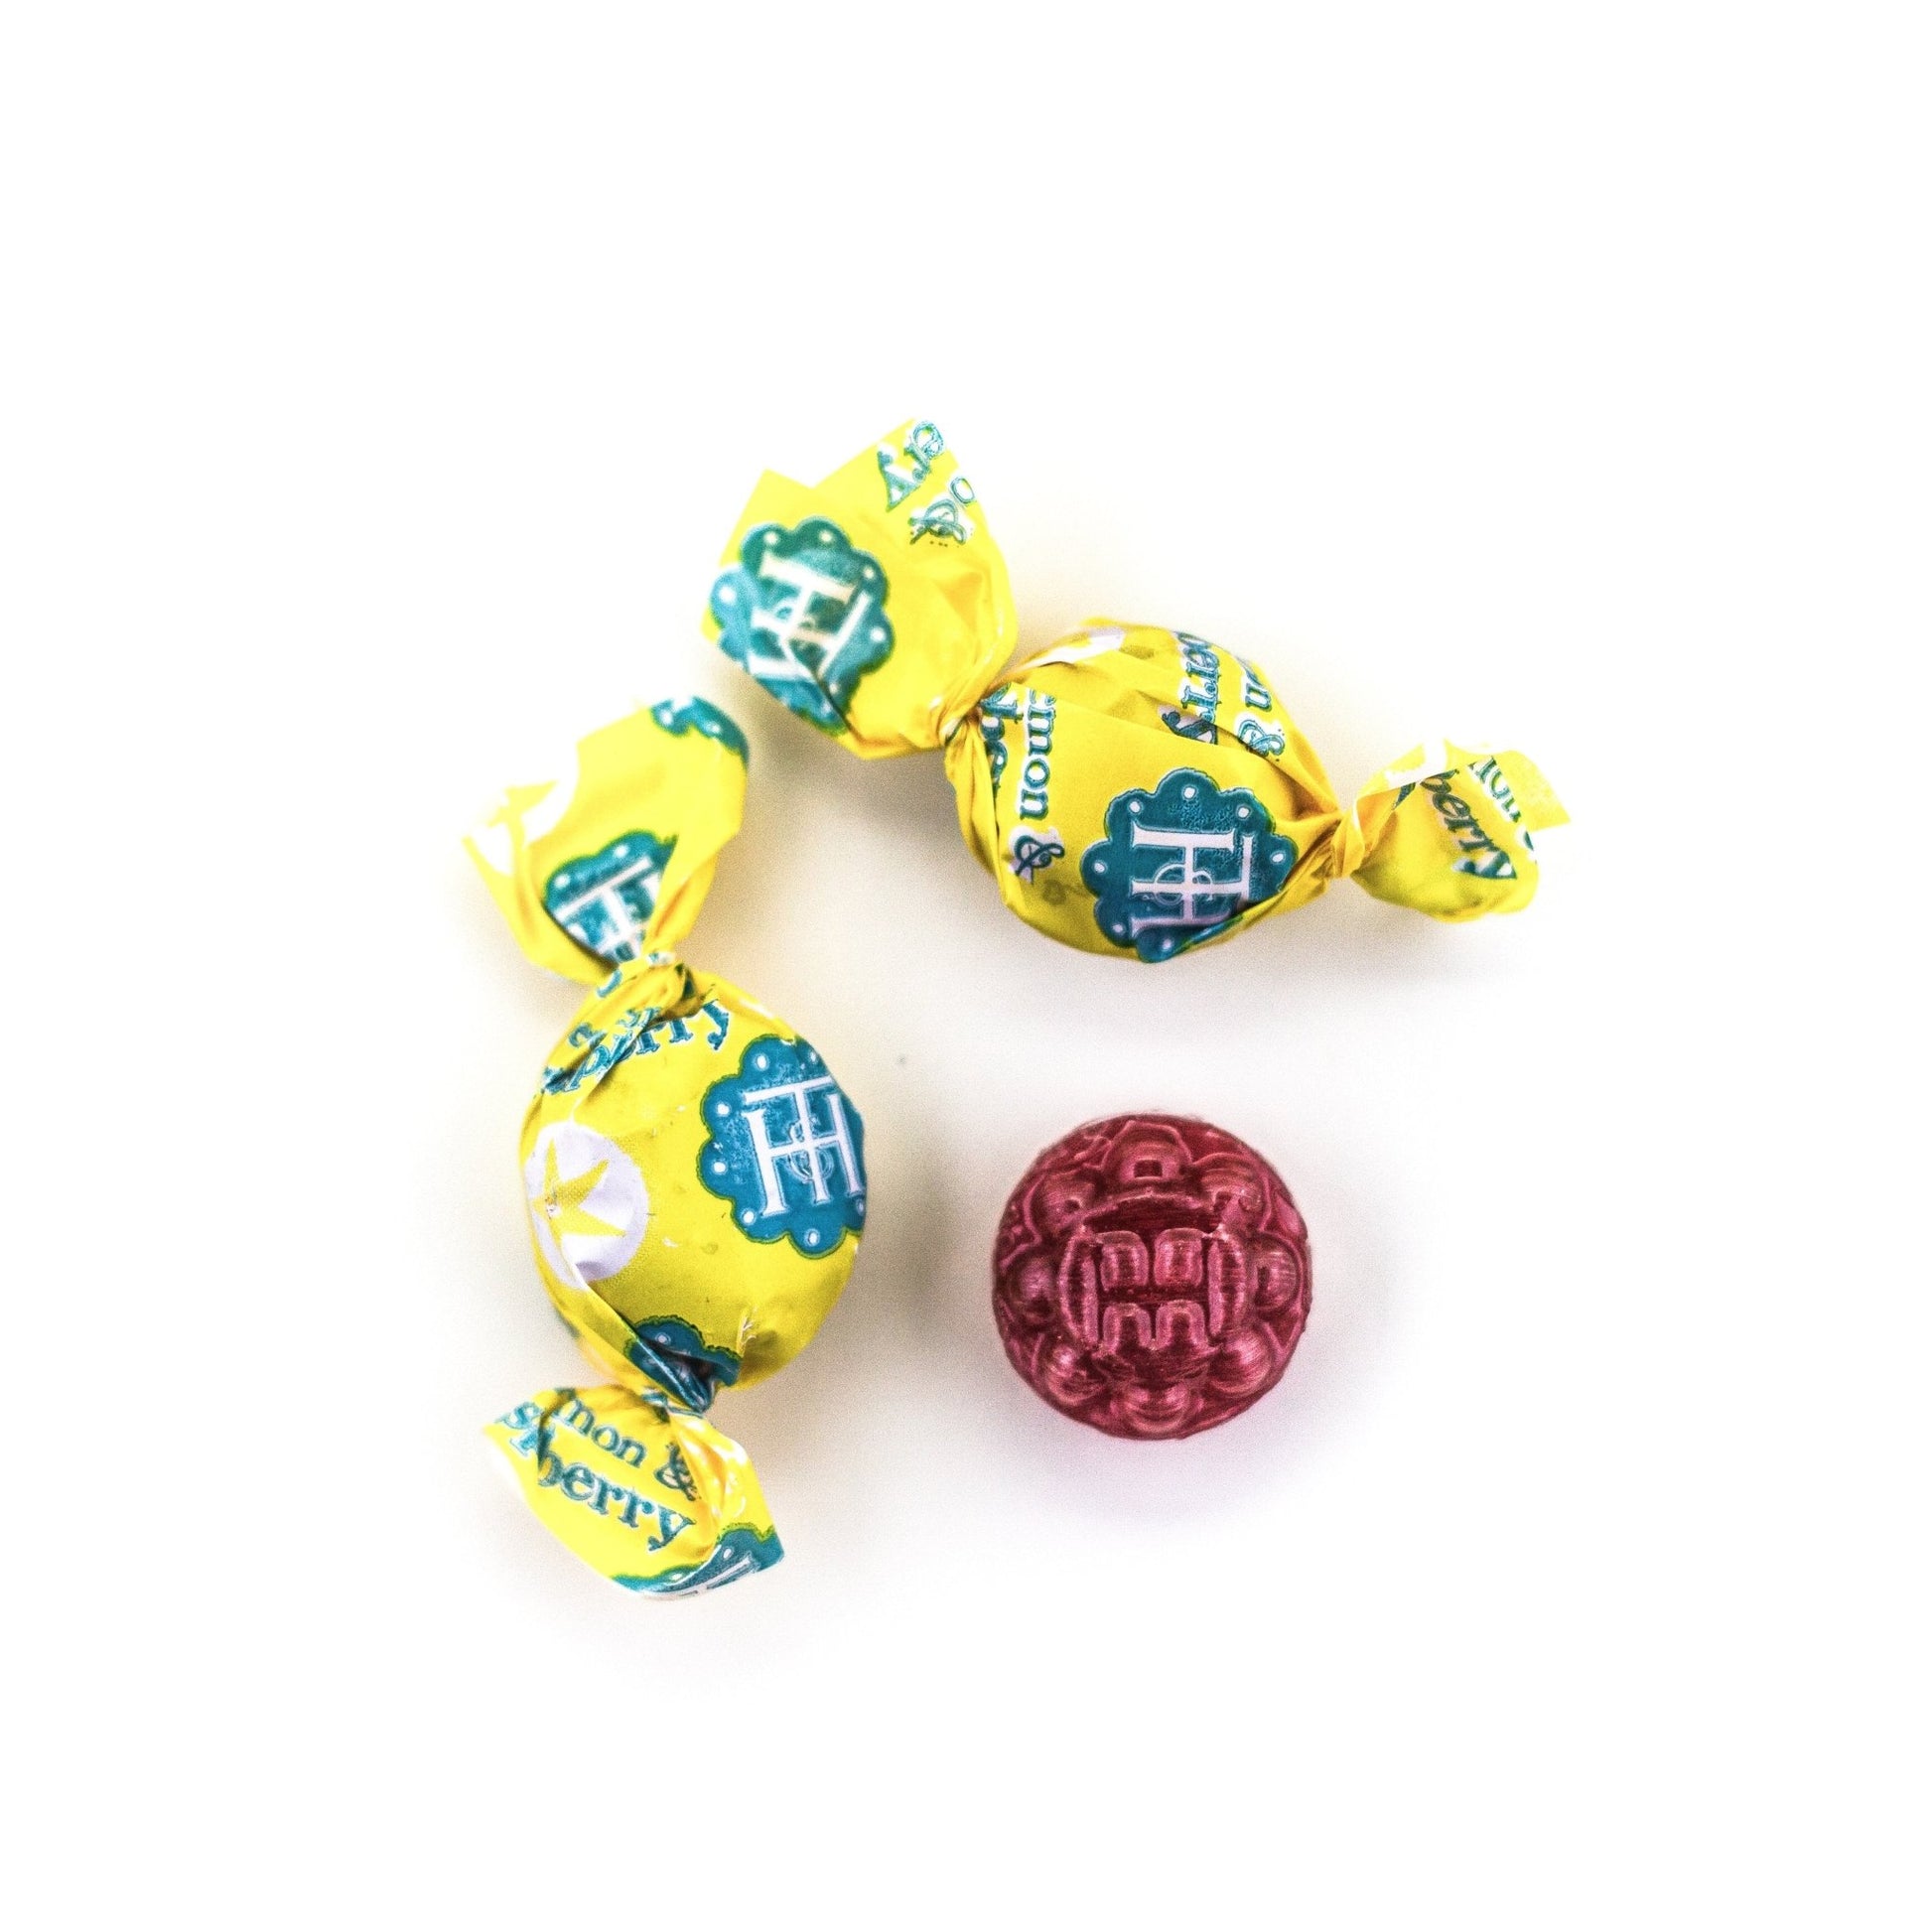 Two wrapped and one unwrapped Lemon & Raspberry Organic Hard Candies